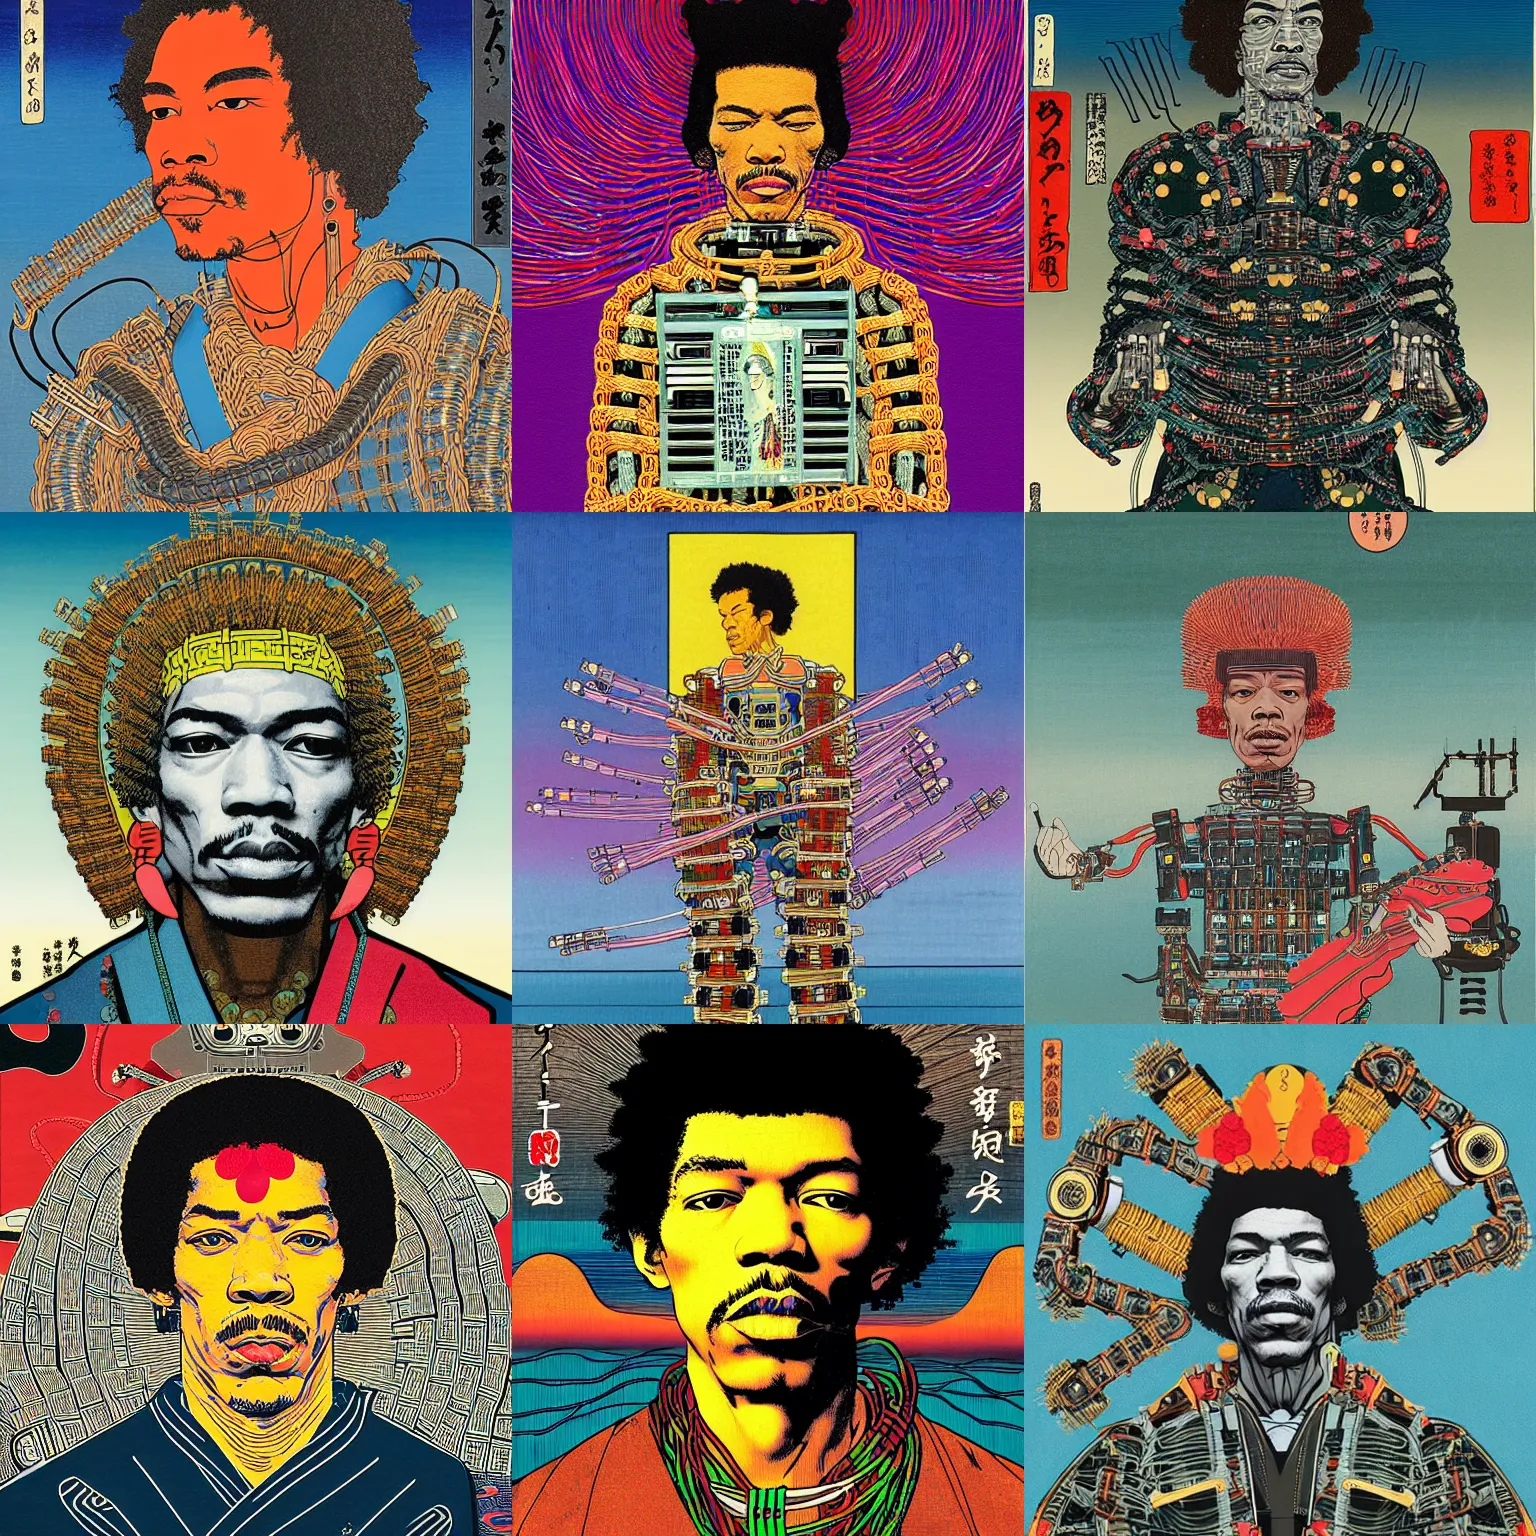 Prompt: a ukiyo-e portrait of jimi hendrix as a robot saint made of cables and robotic parts, by Hiroshige in the style of simon stålenhag